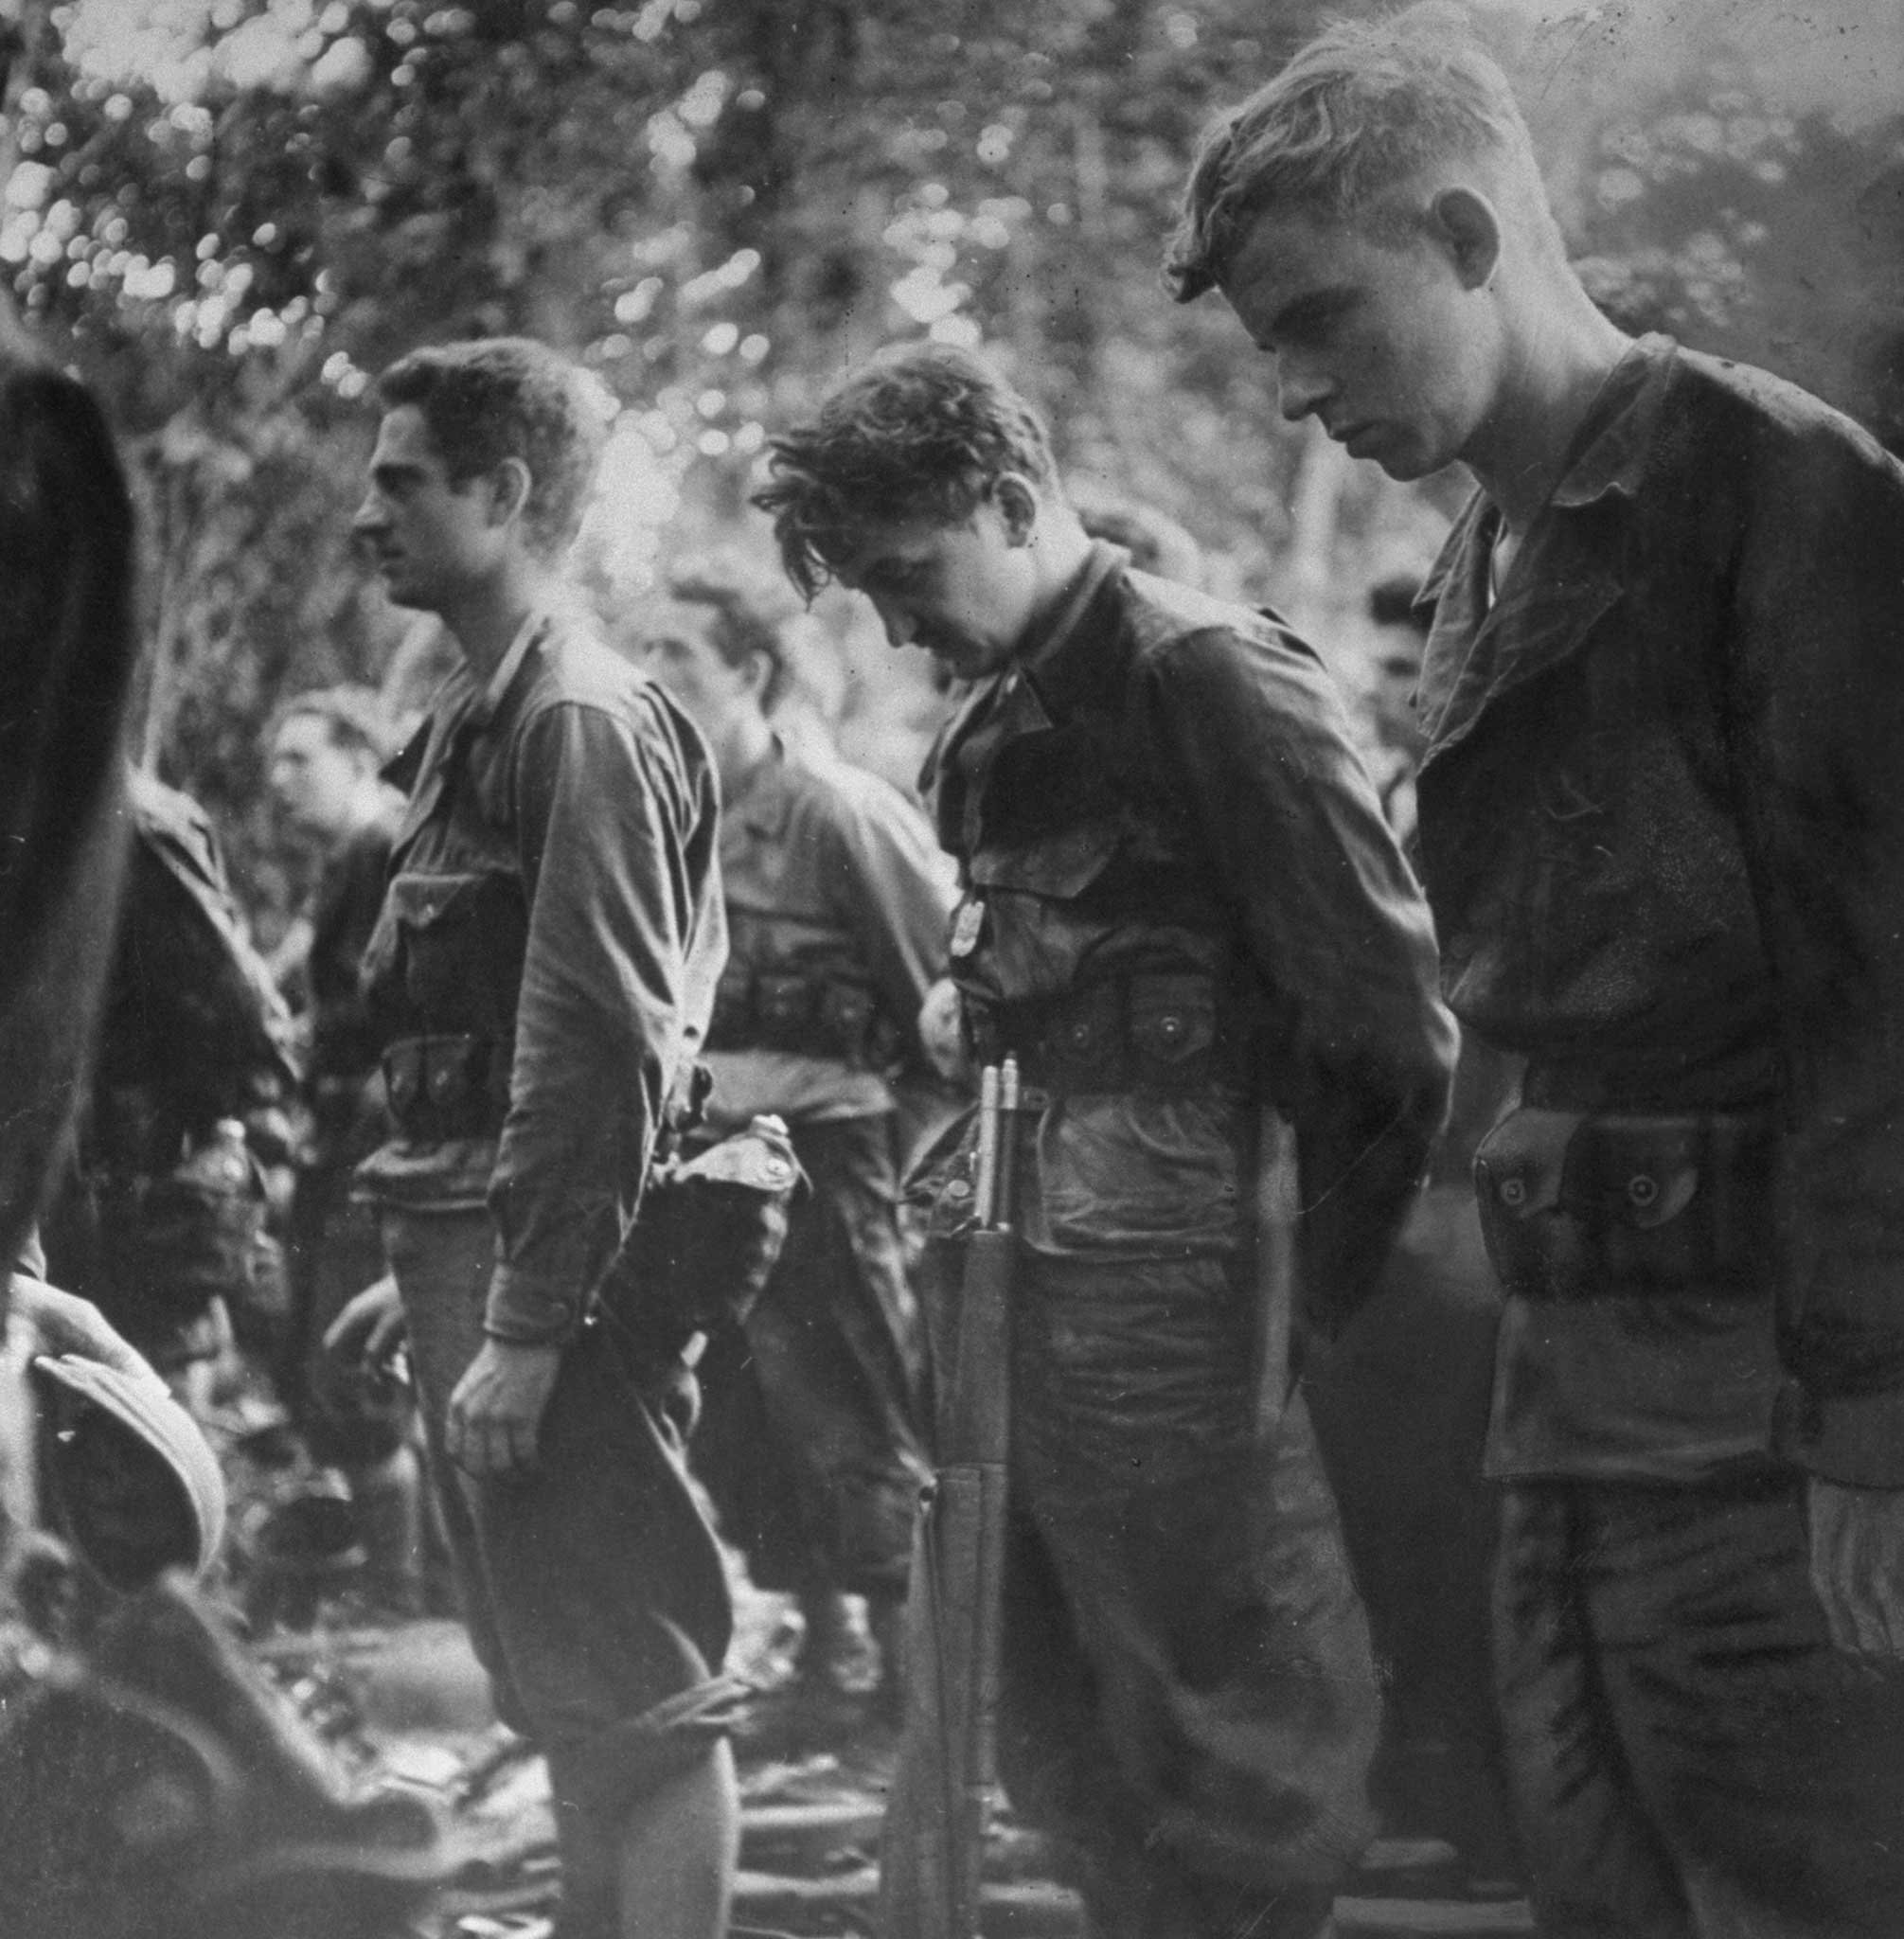 "At church service soldiers who have just captured Buna Village look straight ahead or bow their heads in prayer. Said Captain Boice, their commander: 'This is not the first time Americans have carried guns to church and it will not be the last.' Later Captain Boice was killed."